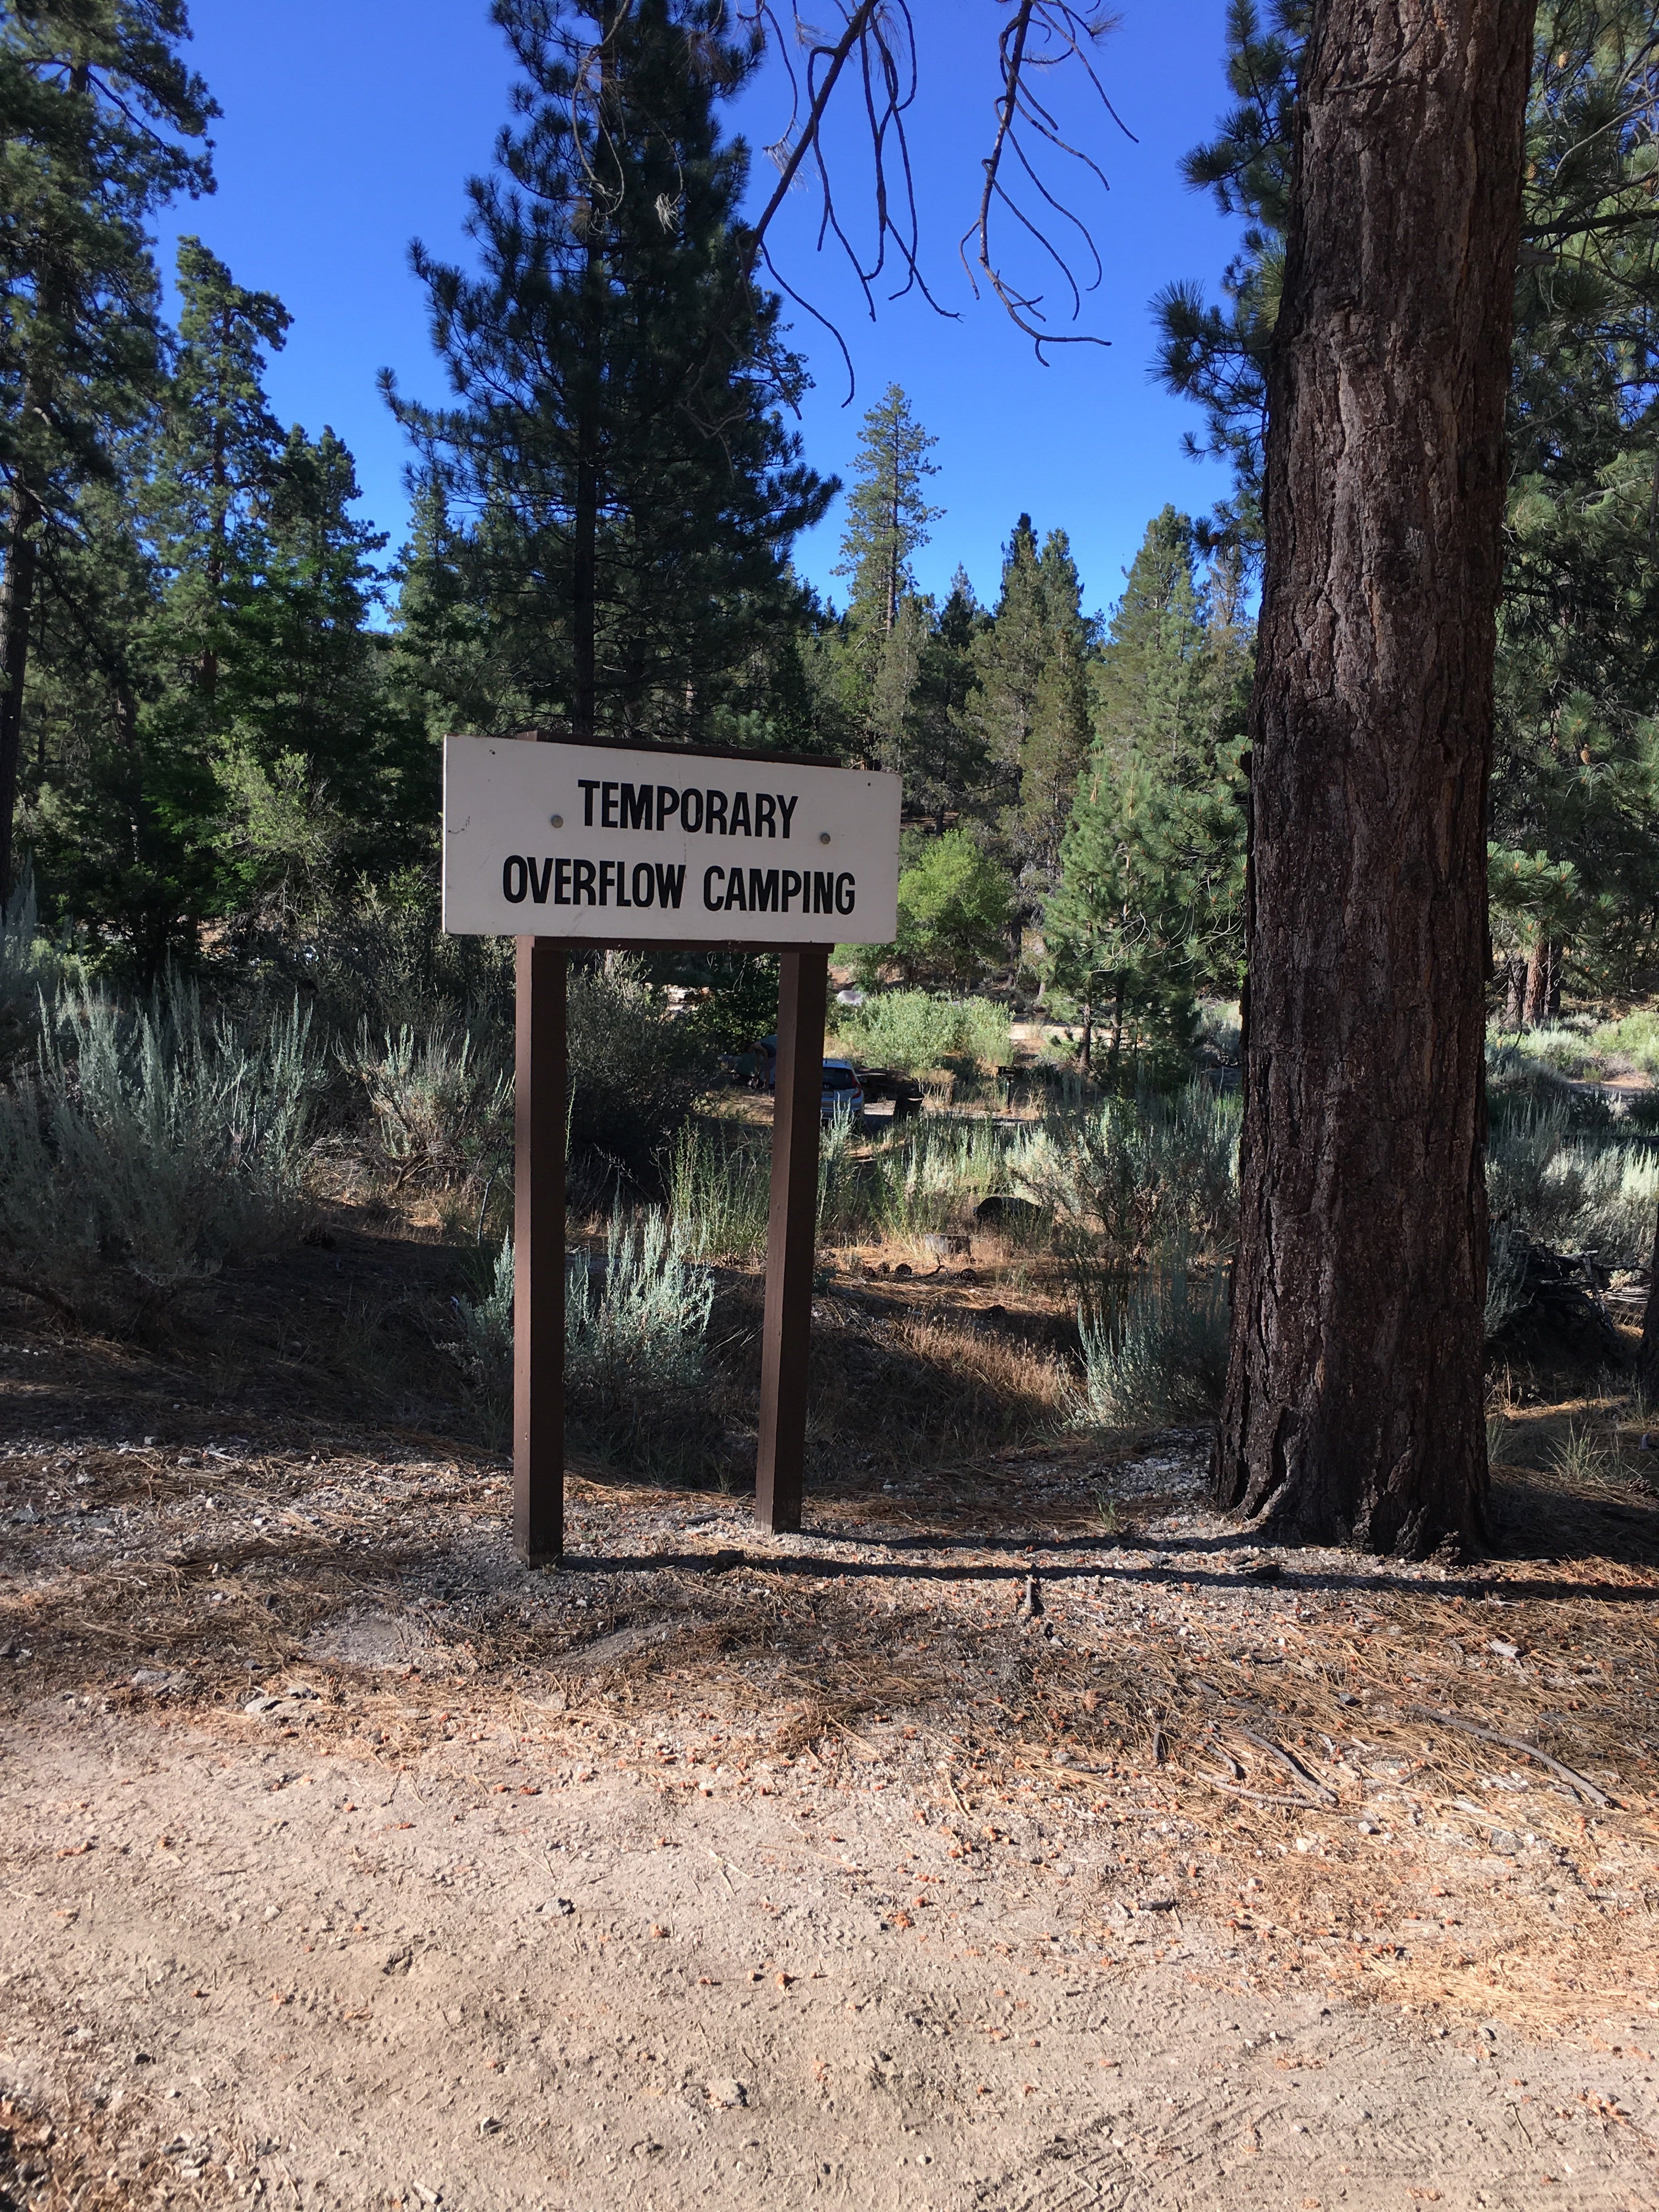 Look for this sign near the visitor center. There are two sections with "overflow" signs posted during the summer months